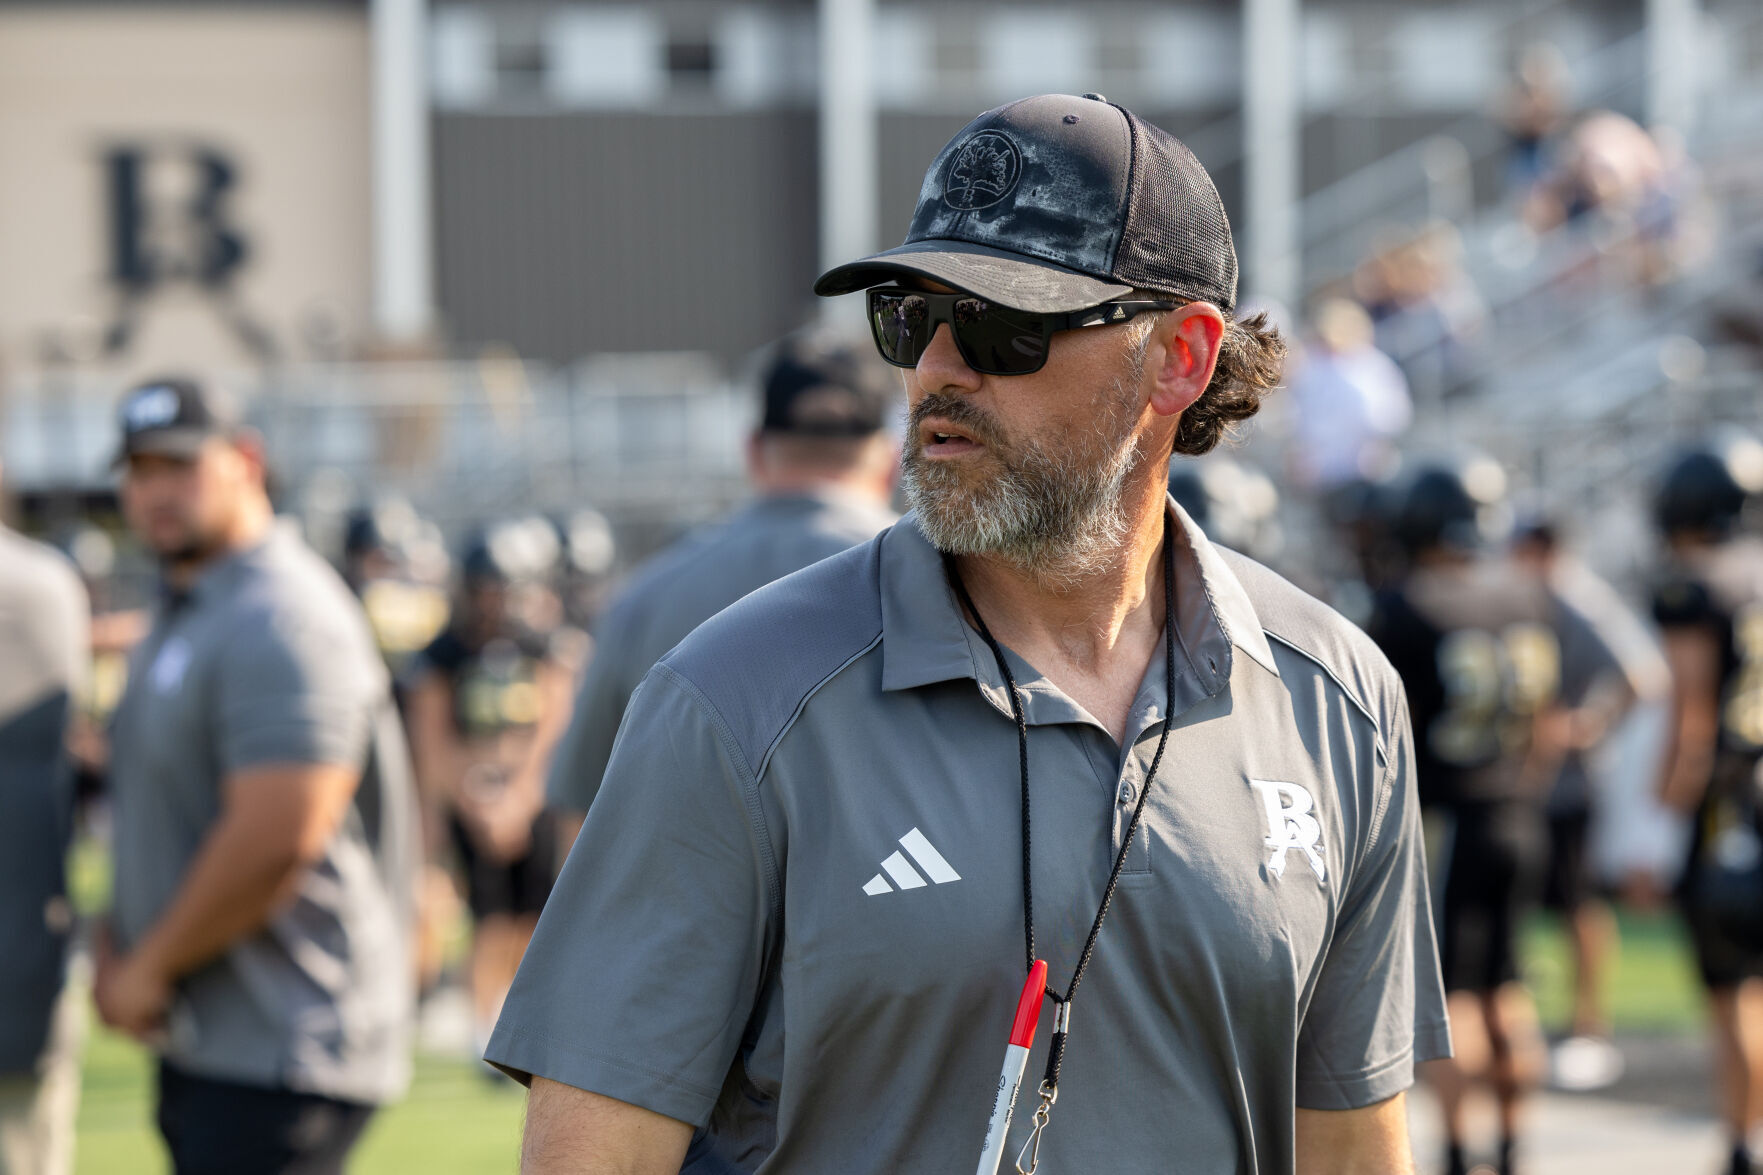 Broken Arrow Football: Hunt for Signature Wins Led by Ssepttimba and Brashears